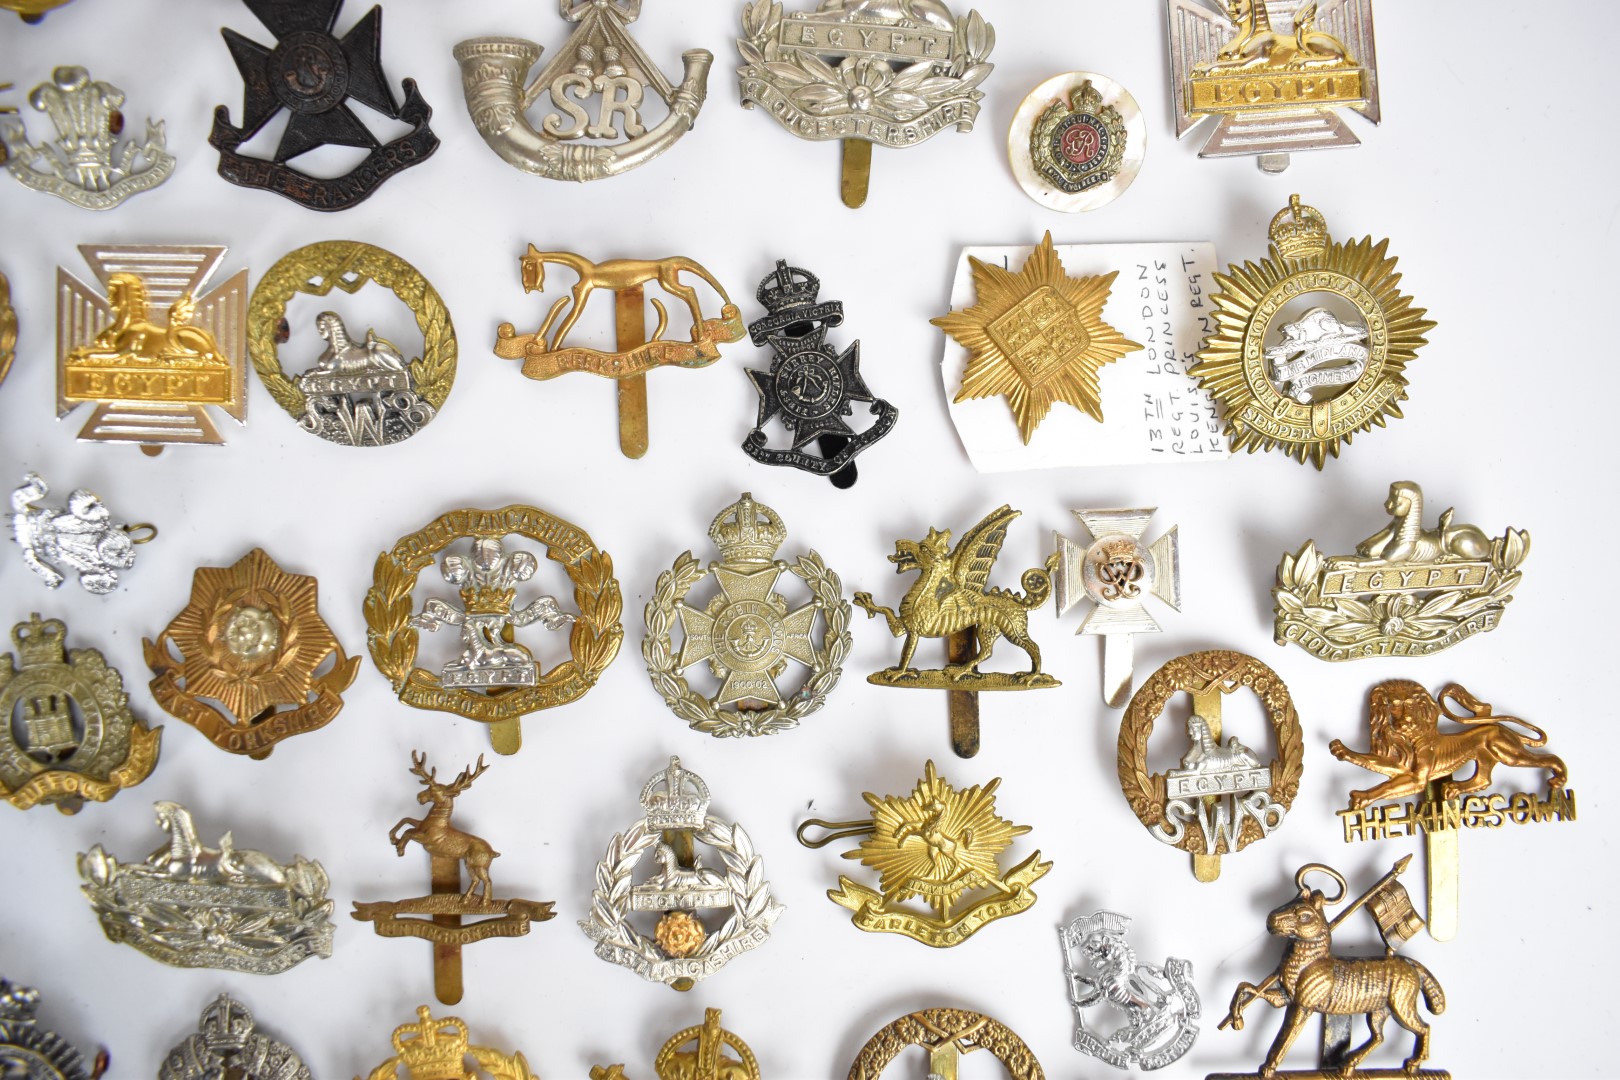 Large collection of approximately 100 British Army cap badges including Royal Sussex Regiment, - Image 11 of 14